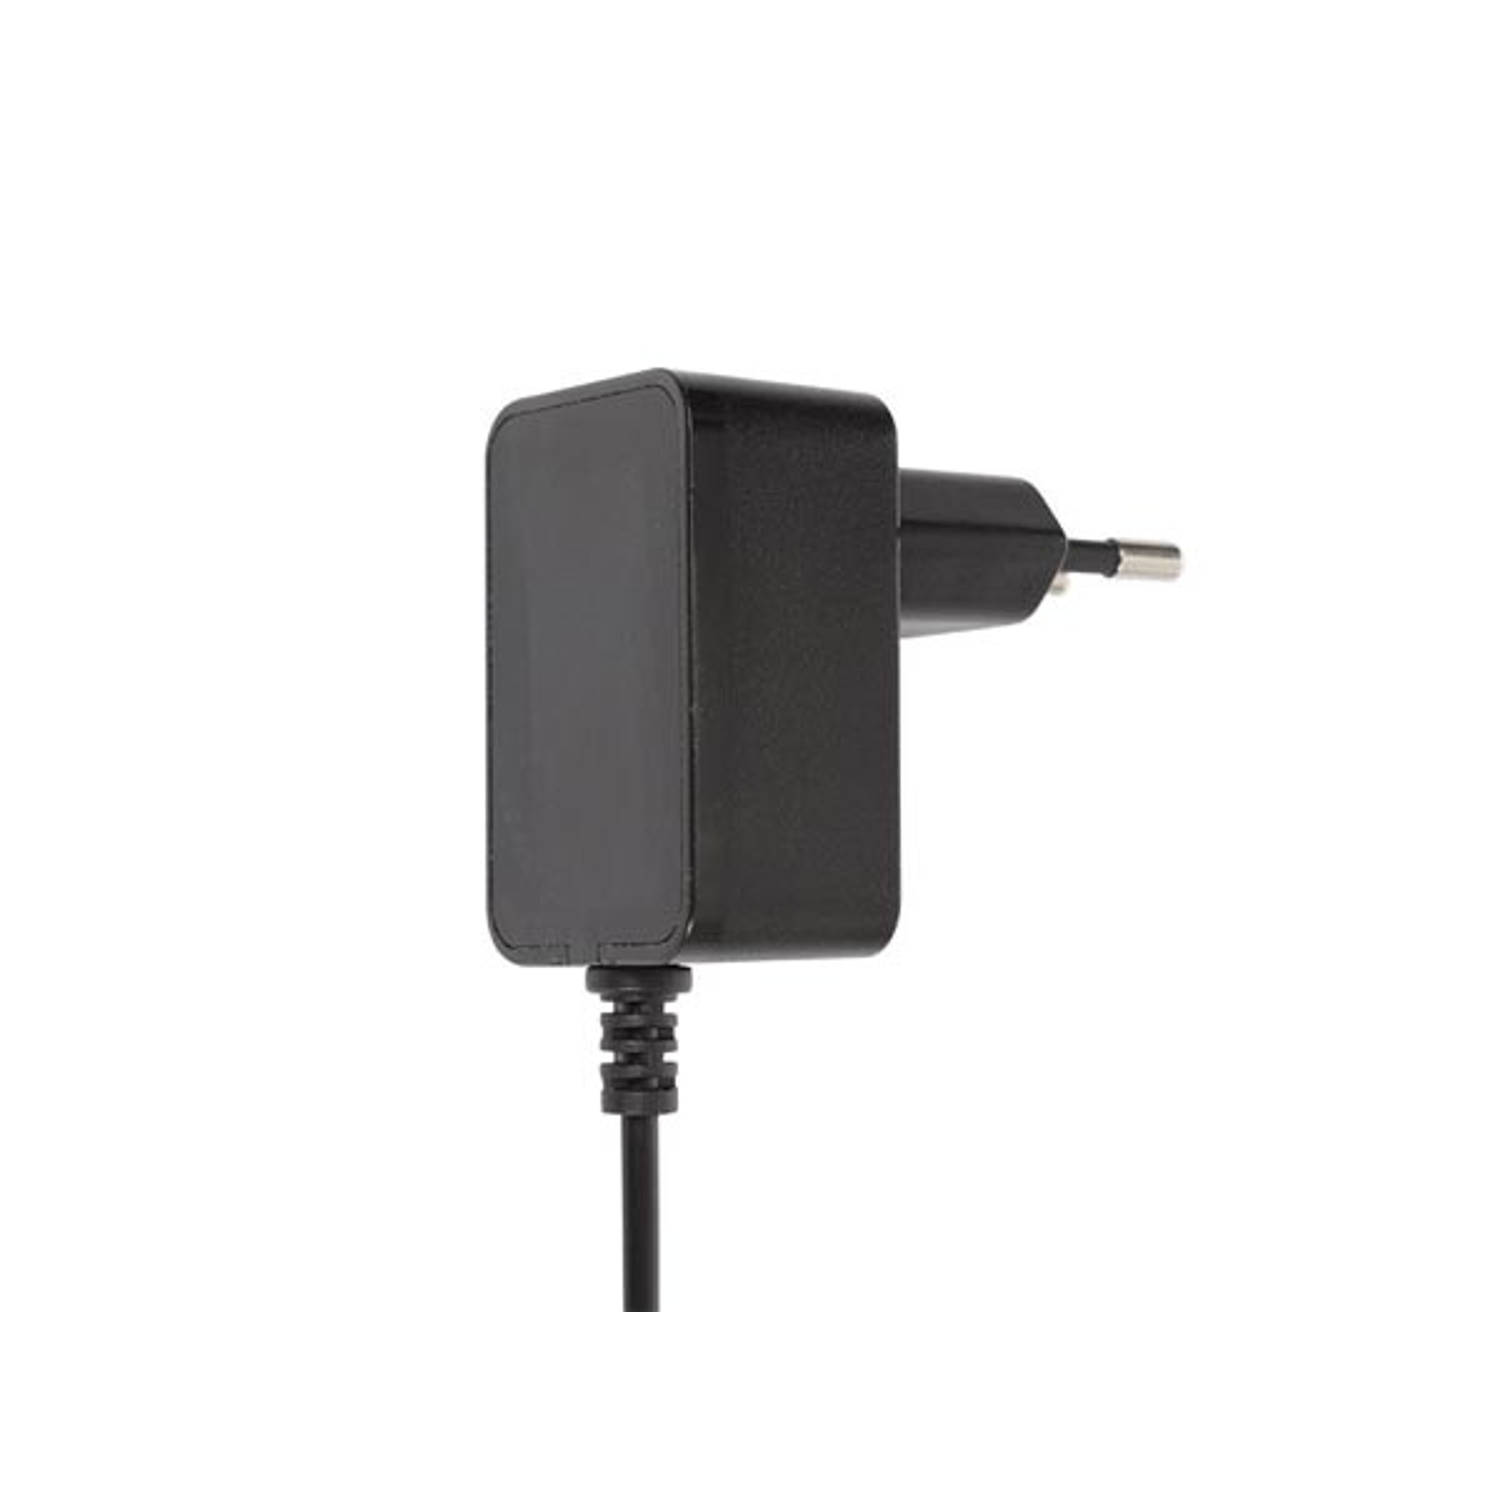 UNIVERSELE VOEDING - 12 VDC - 0.5 A - 6 W - CONNECTOR (2.1 x 5.5 mm)